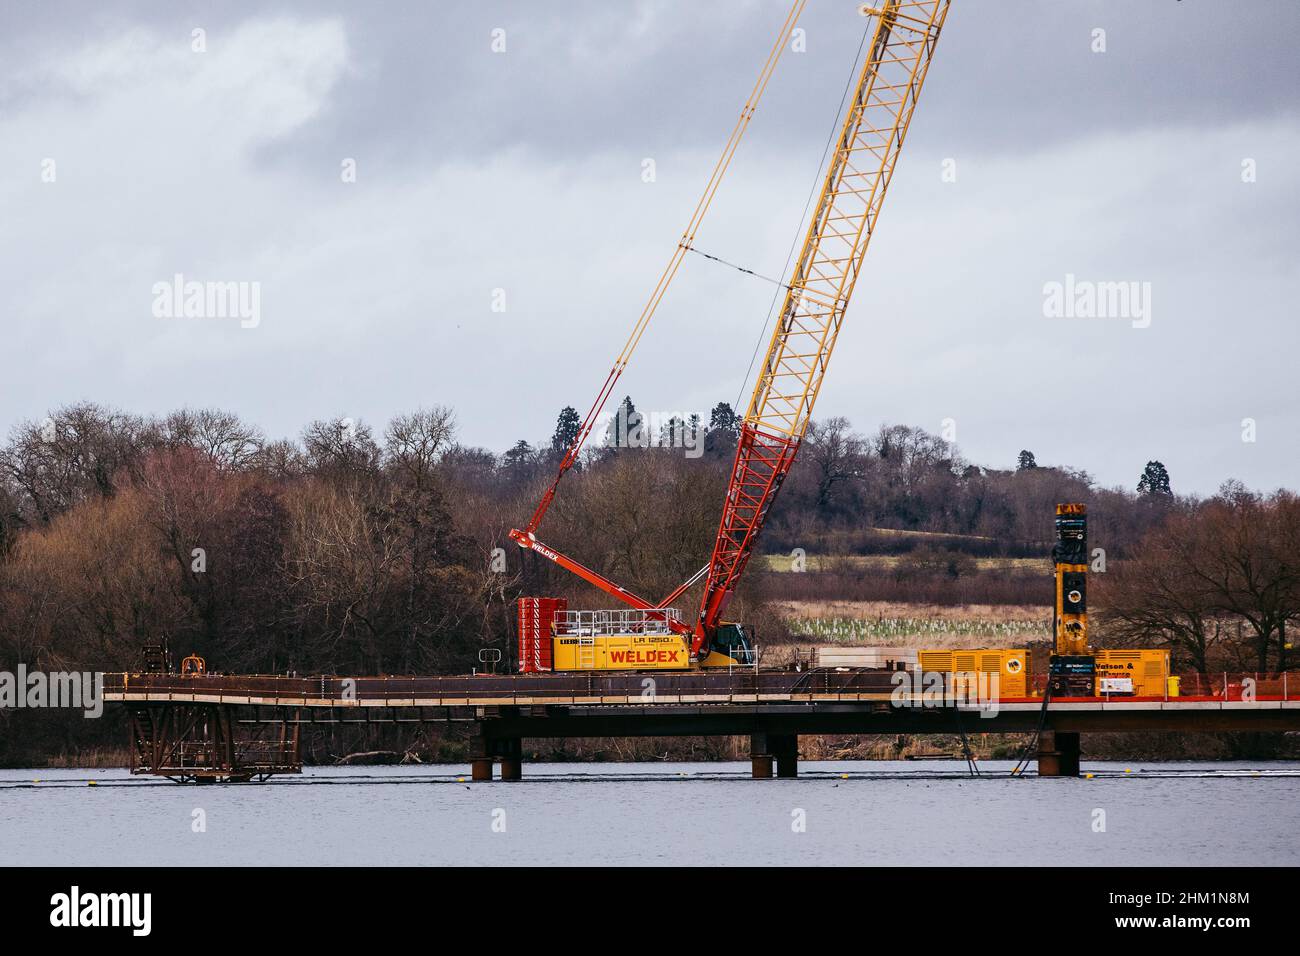 Harefield, UK. 5th February, 2022. Construction works for the HS2 Colne Valley Viaduct, which will become the UK's longest railway bridge, are pictured at HOAC Lake (Harefield Lake No. 2). A viaduct requiring 292 piles driven into the aquifer, a natural water filtration system, is currently being constructed to carry HS2 across lakes and watercourses in the Colne Valley Regional Park. Credit: Mark Kerrison/Alamy Live News Stock Photo